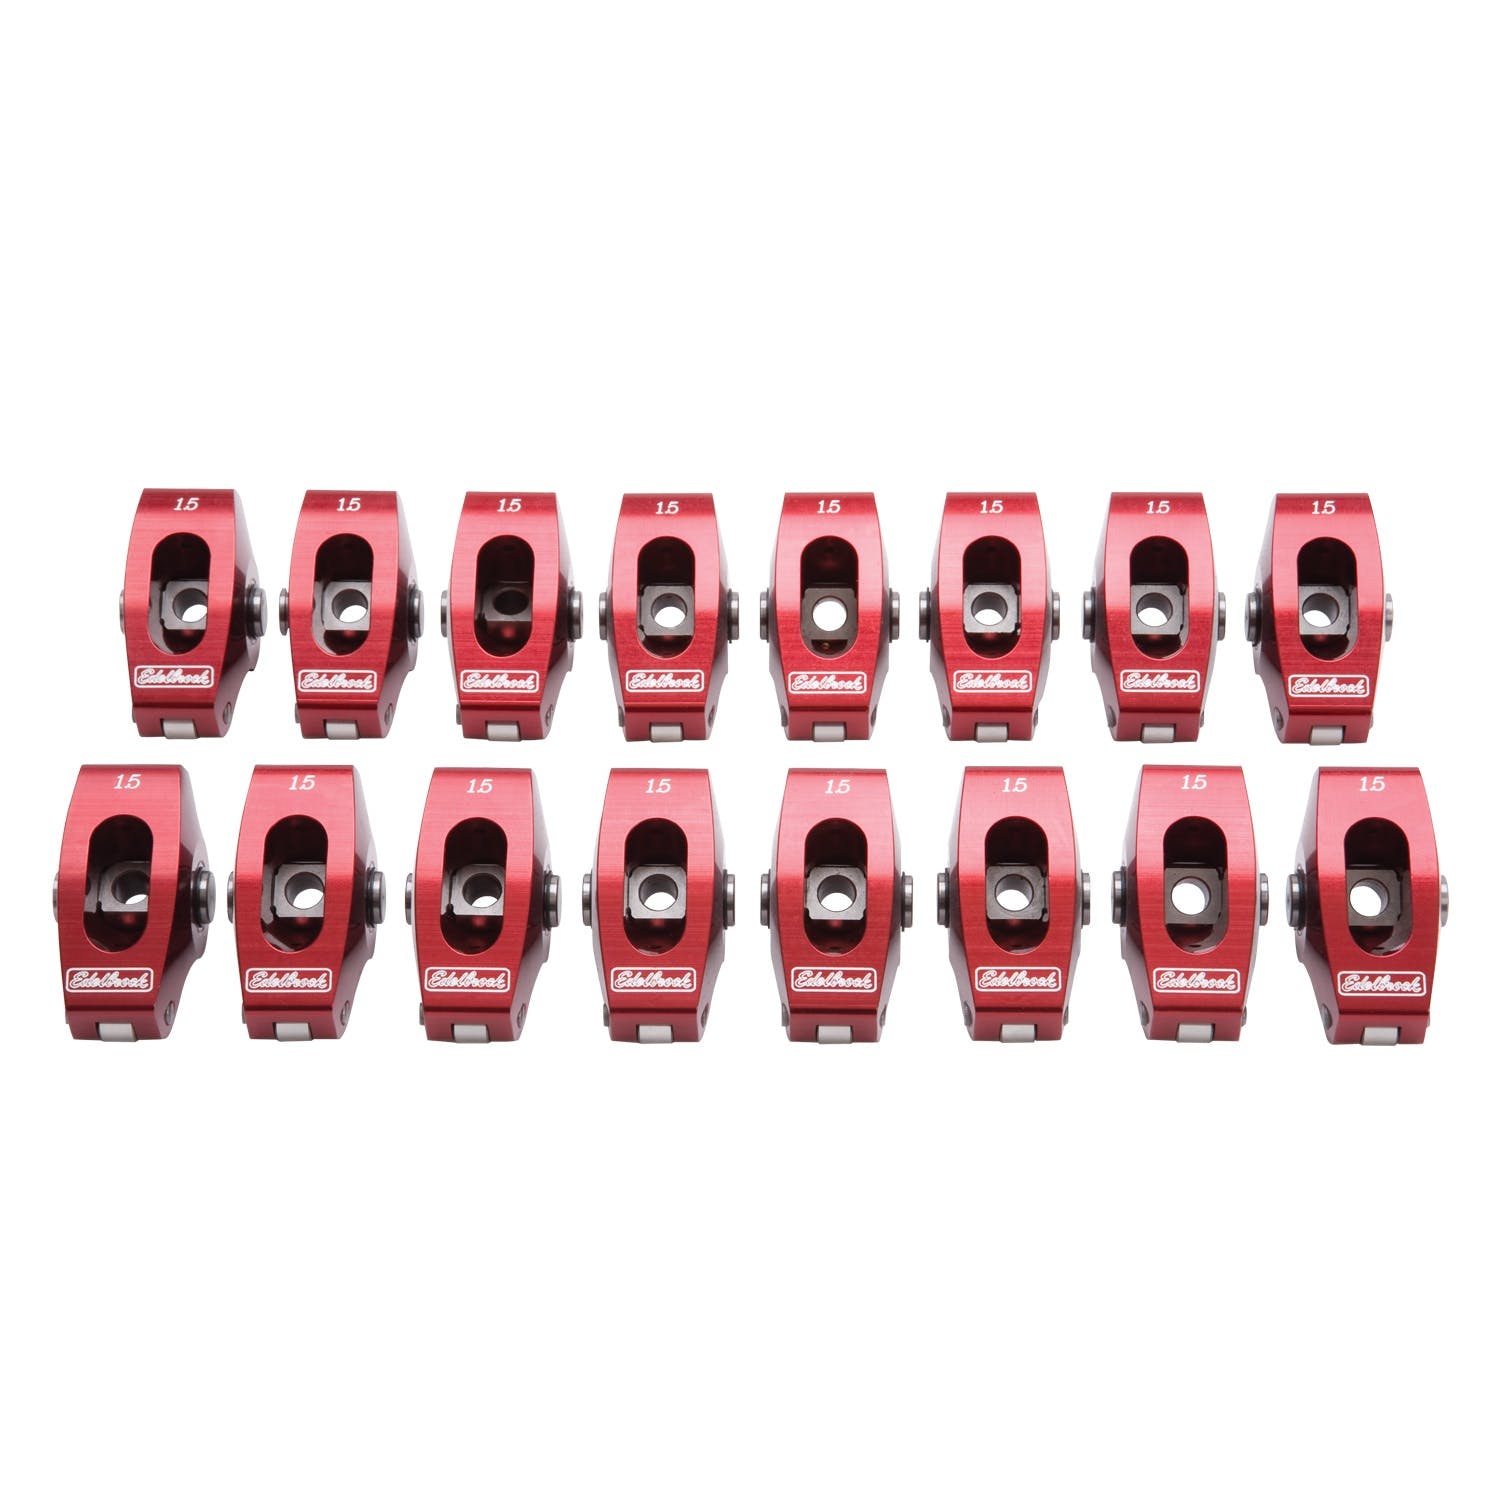 Edelbrock 77760 Red Roller Rockers for Small-Block Chevy 3/8 stud 1.5:1 Wide body (Qty 16)